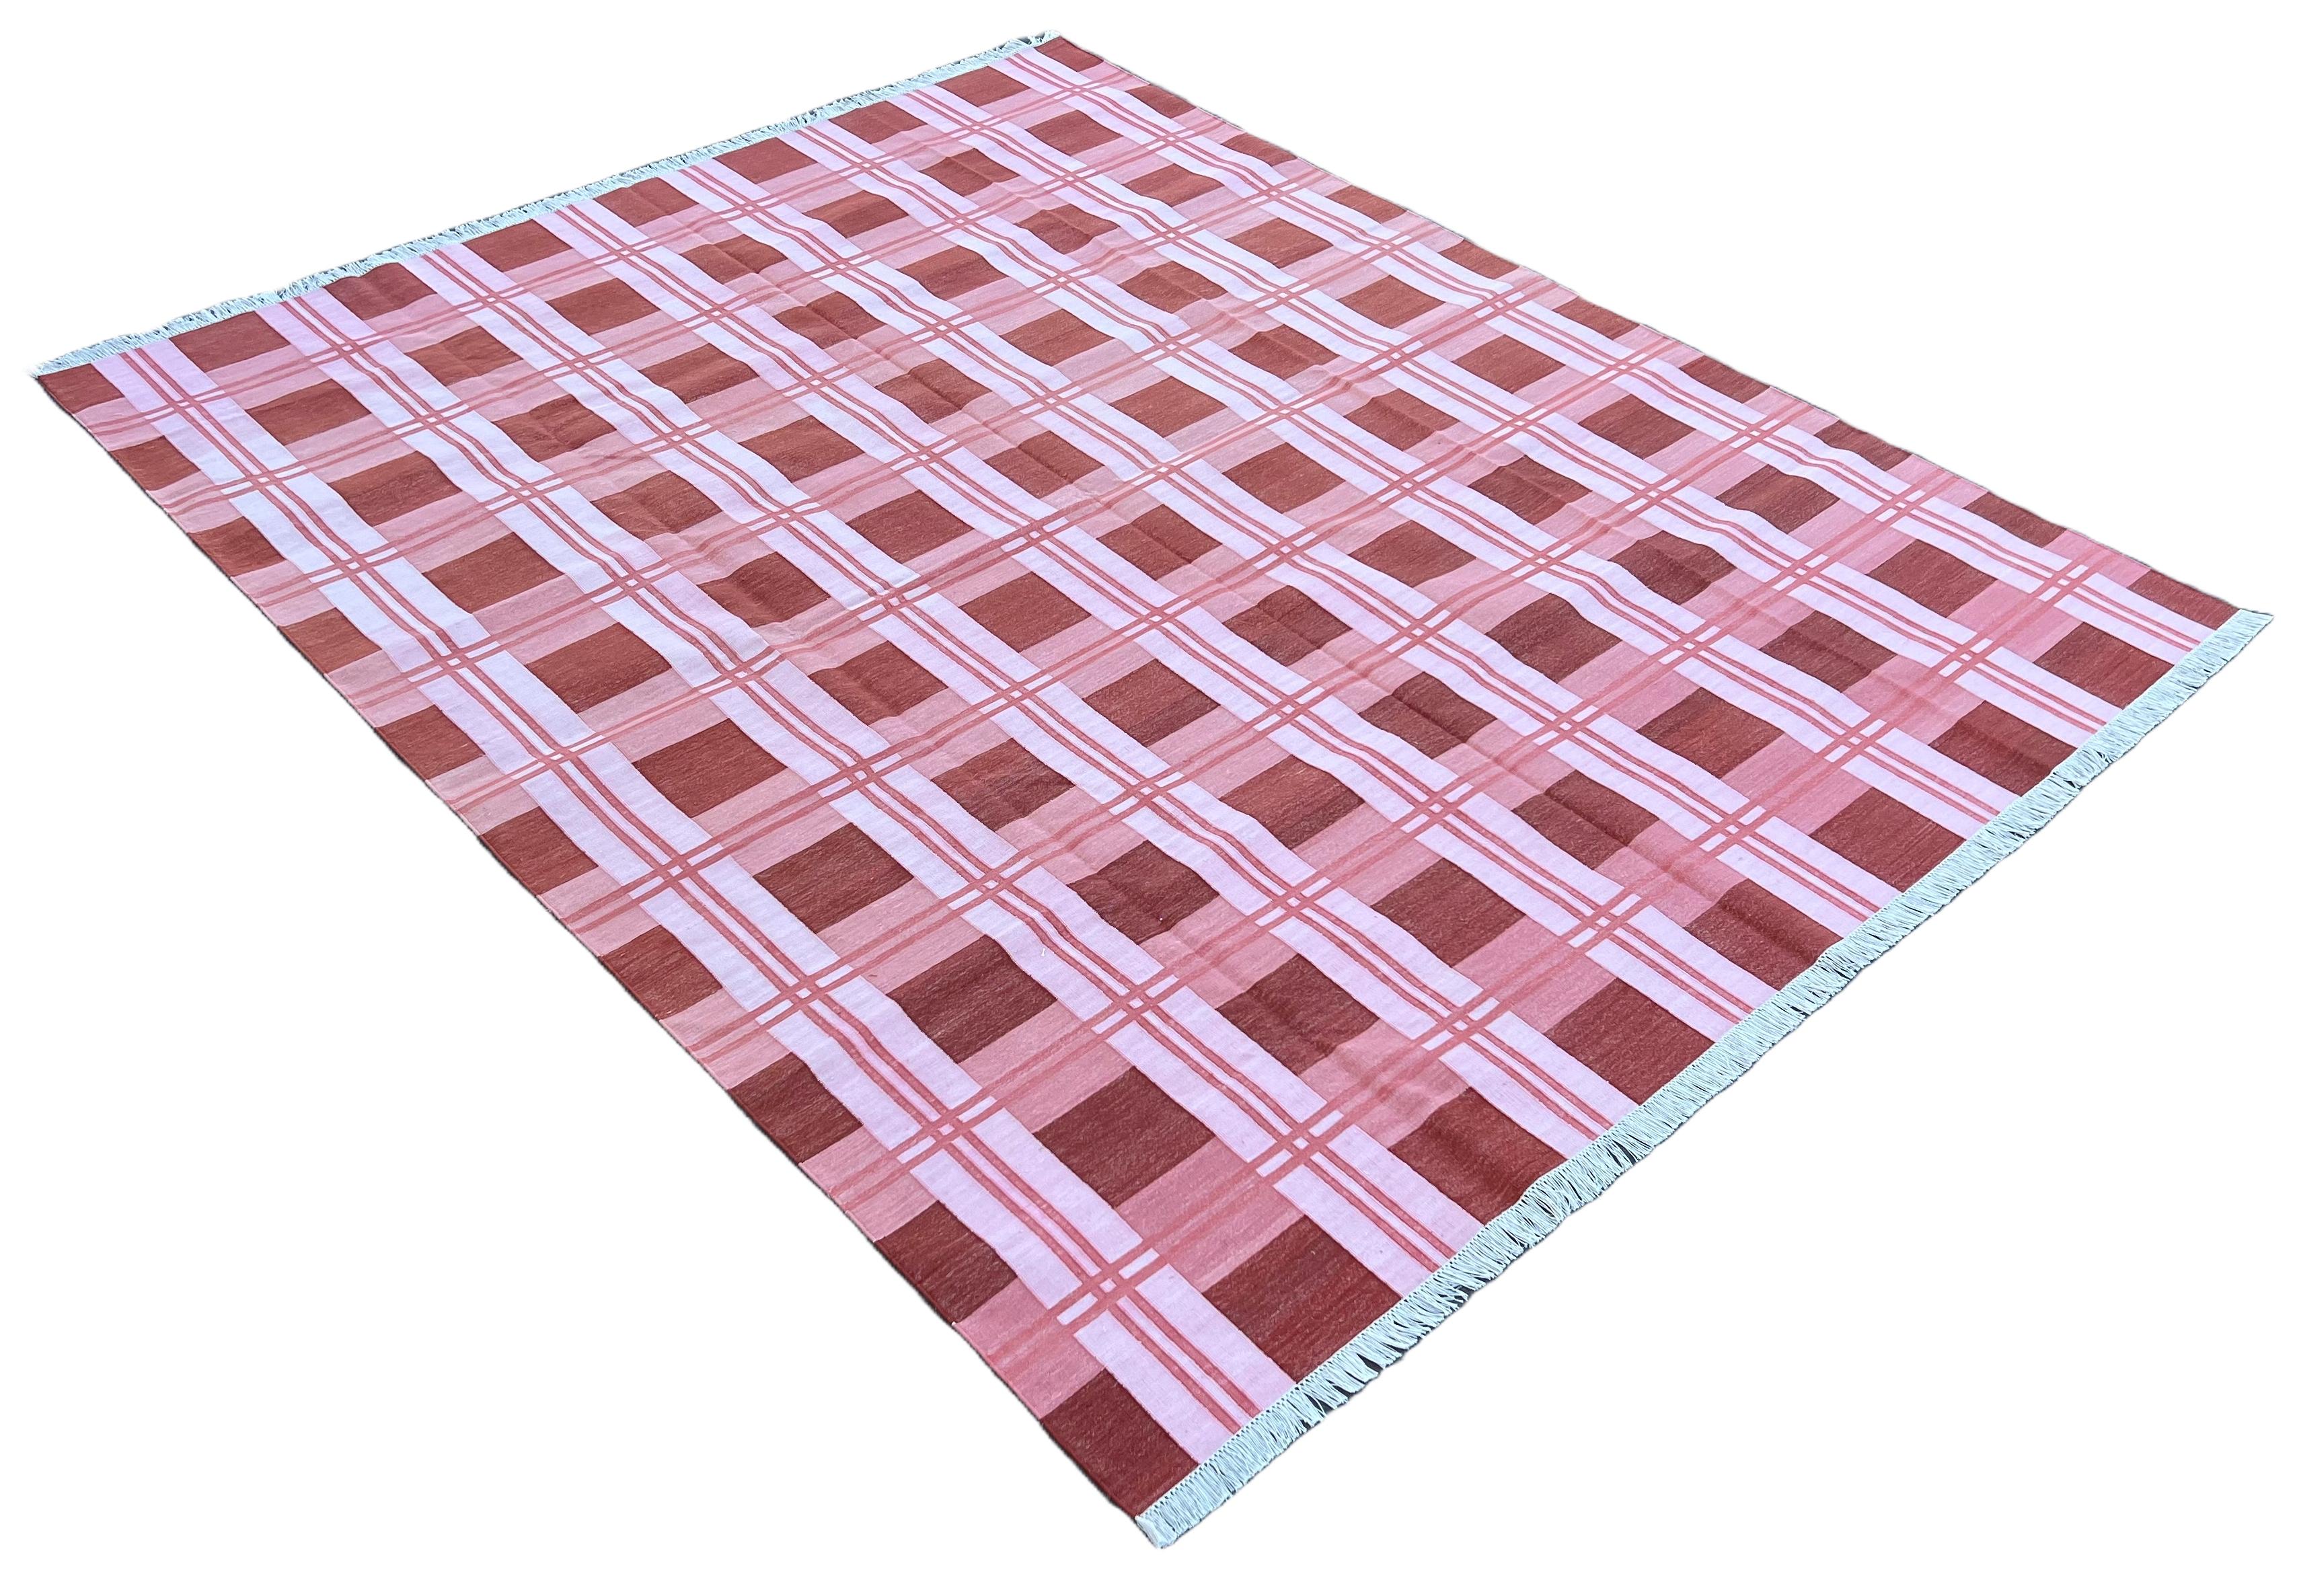 Cotton Vegetable Dyed Reversible Pink And Red Checked Patterned Indian Rug - 8'x10'
These special flat-weave dhurries are hand-woven with 15 ply 100% cotton yarn. Due to the special manufacturing techniques used to create our rugs, the size and